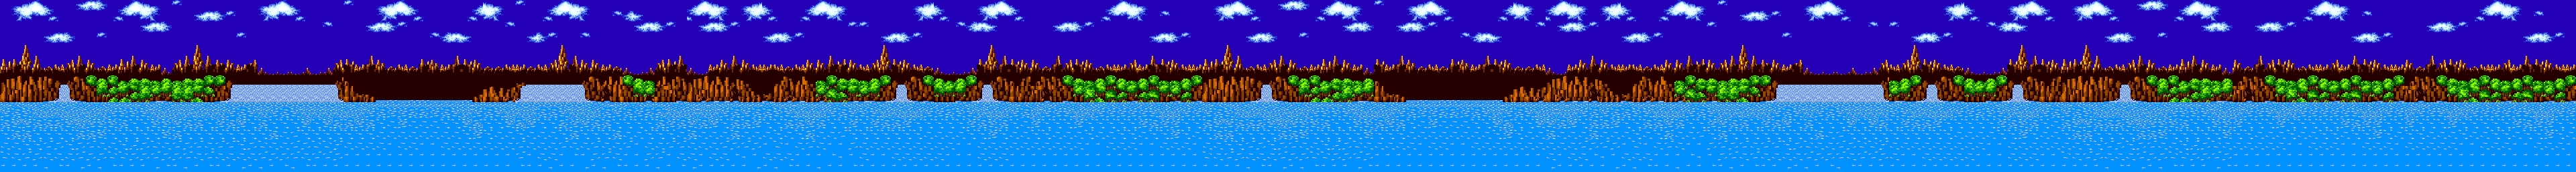 Sonic Chaos (Fan Game) - Green Hill Zone Background